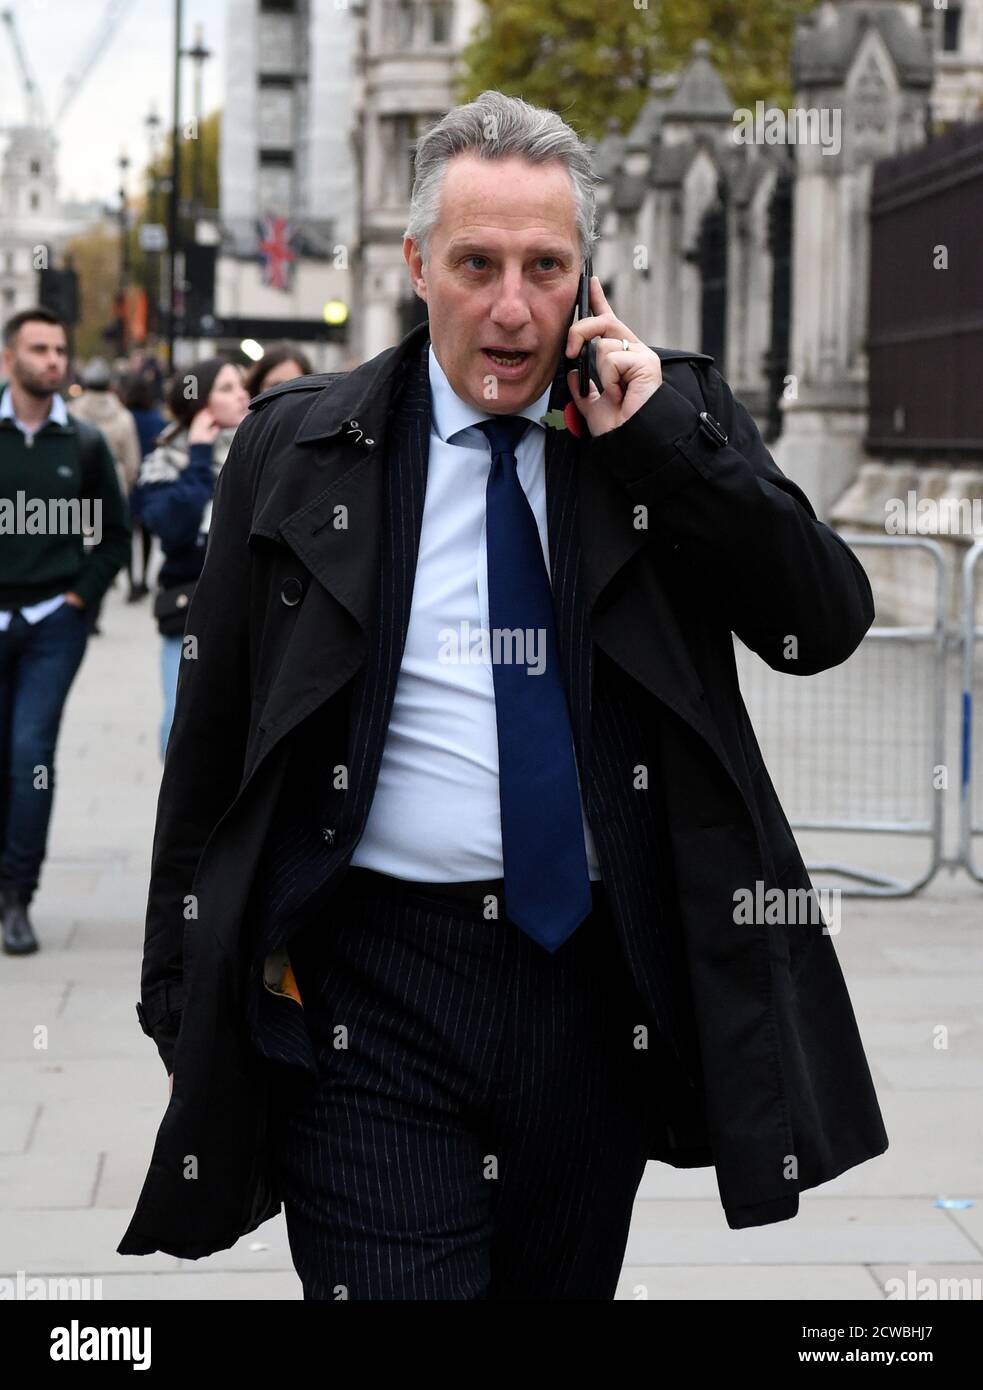 Photograph of Ian Paisley Jr. Ian Richard Kyle Paisley Jr (1966-) a politician from Northern Ireland. He has served as the Member of Parliament for North Antrim since the 2010 general election. Stock Photo